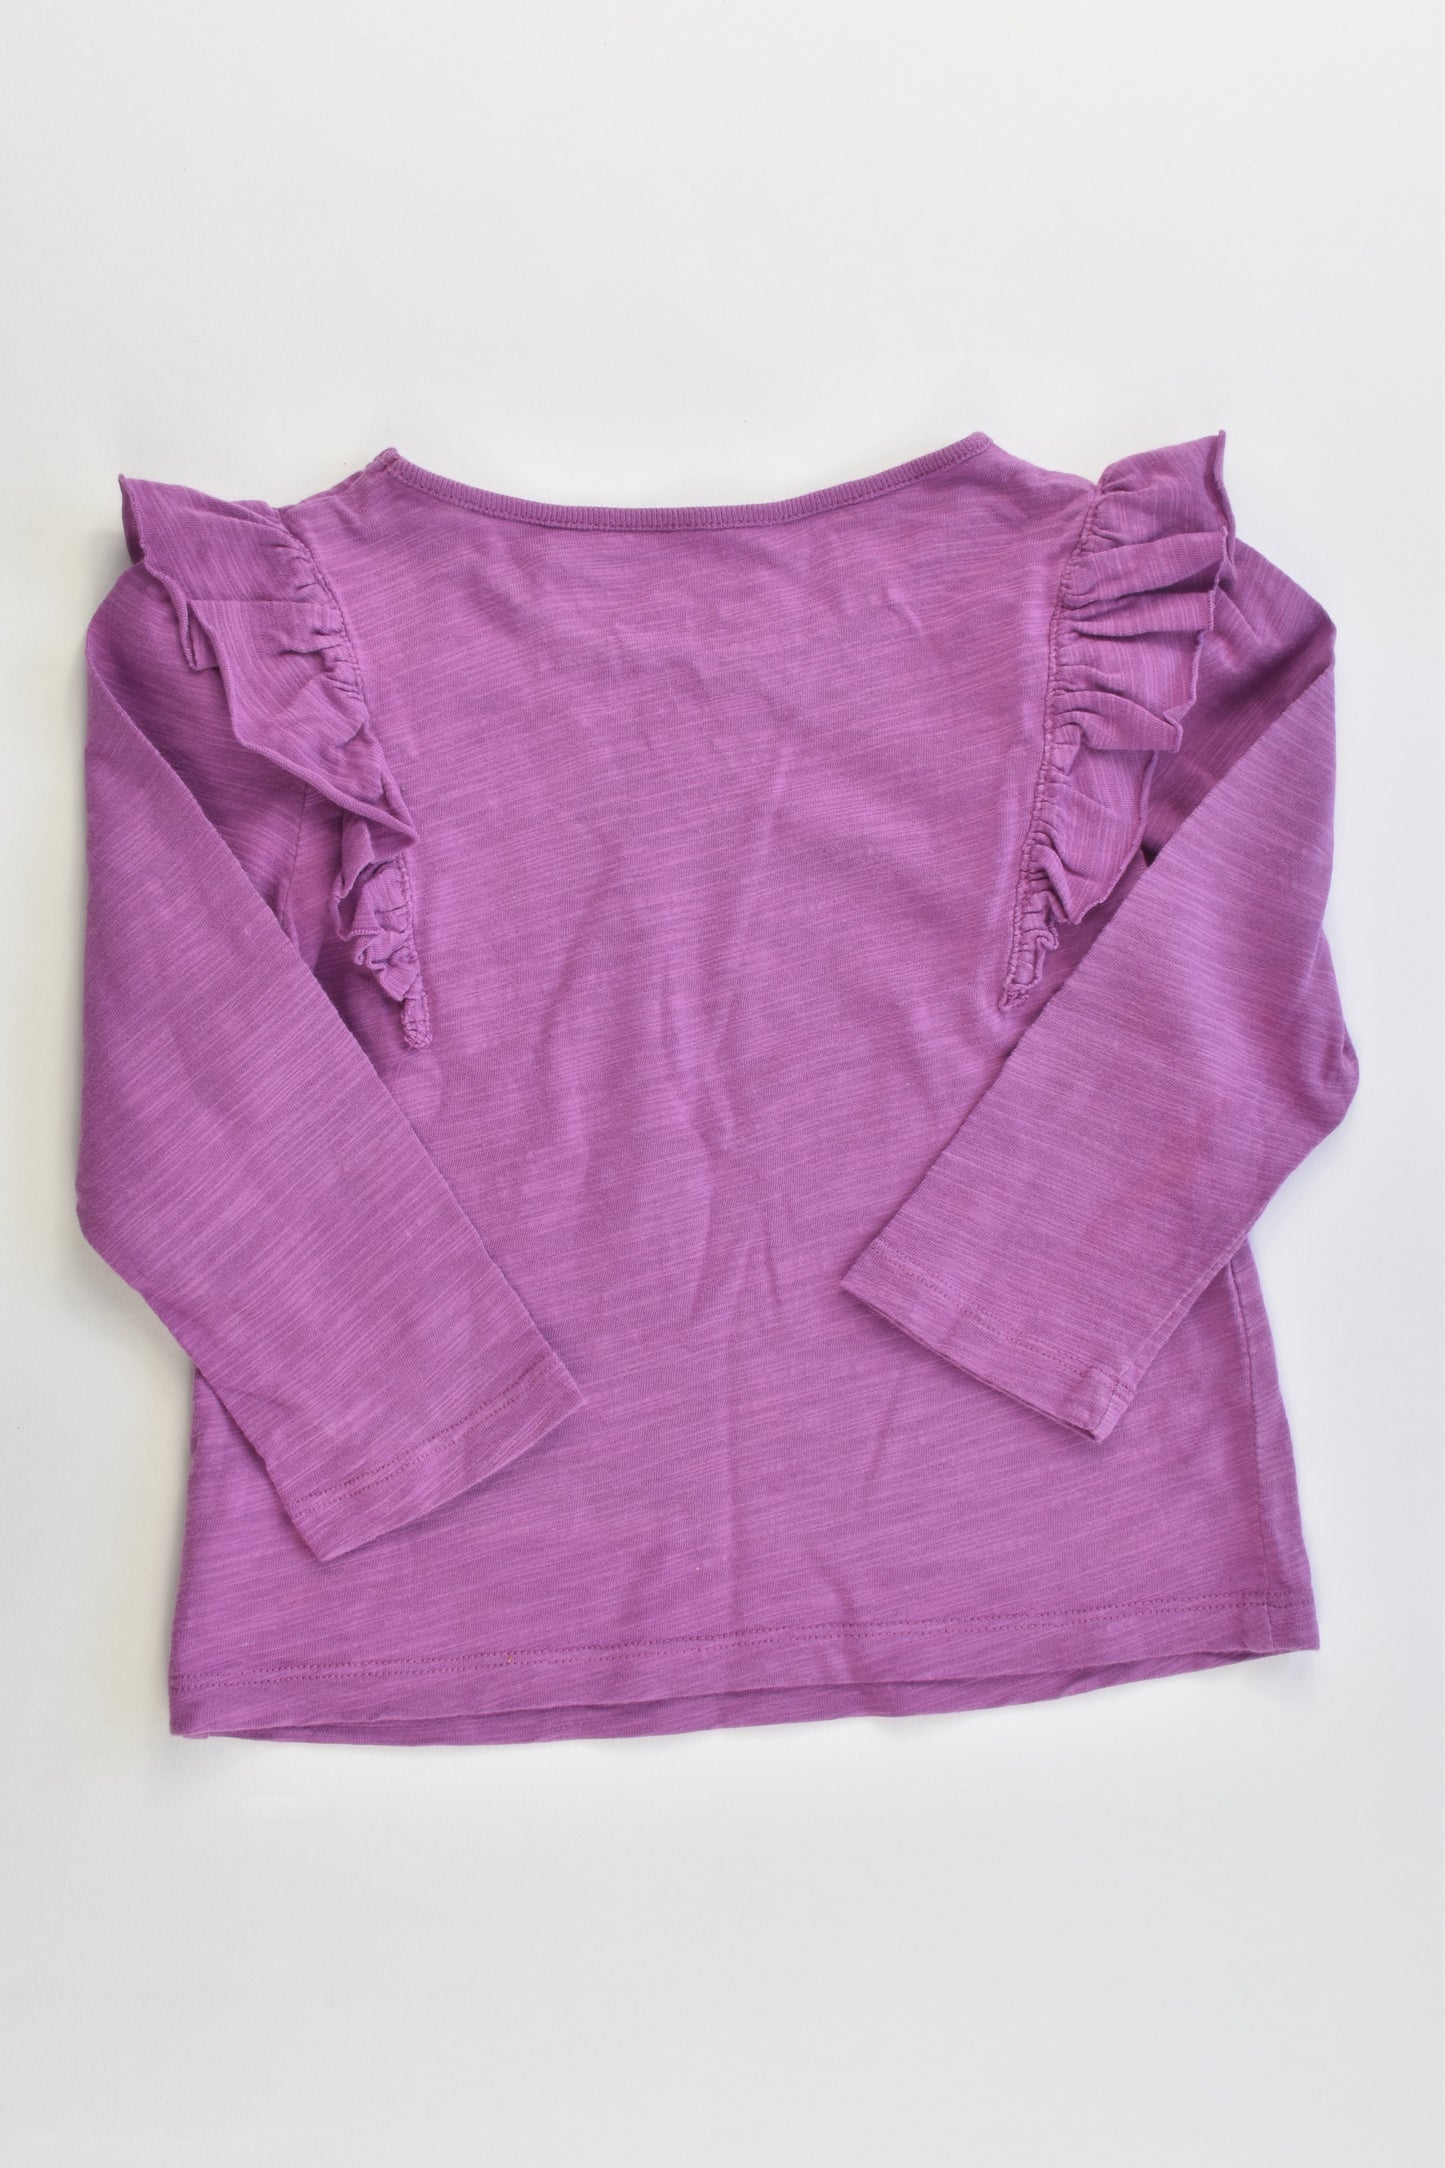 Juicy Couture (US) Size 2 (18-24 months) Top